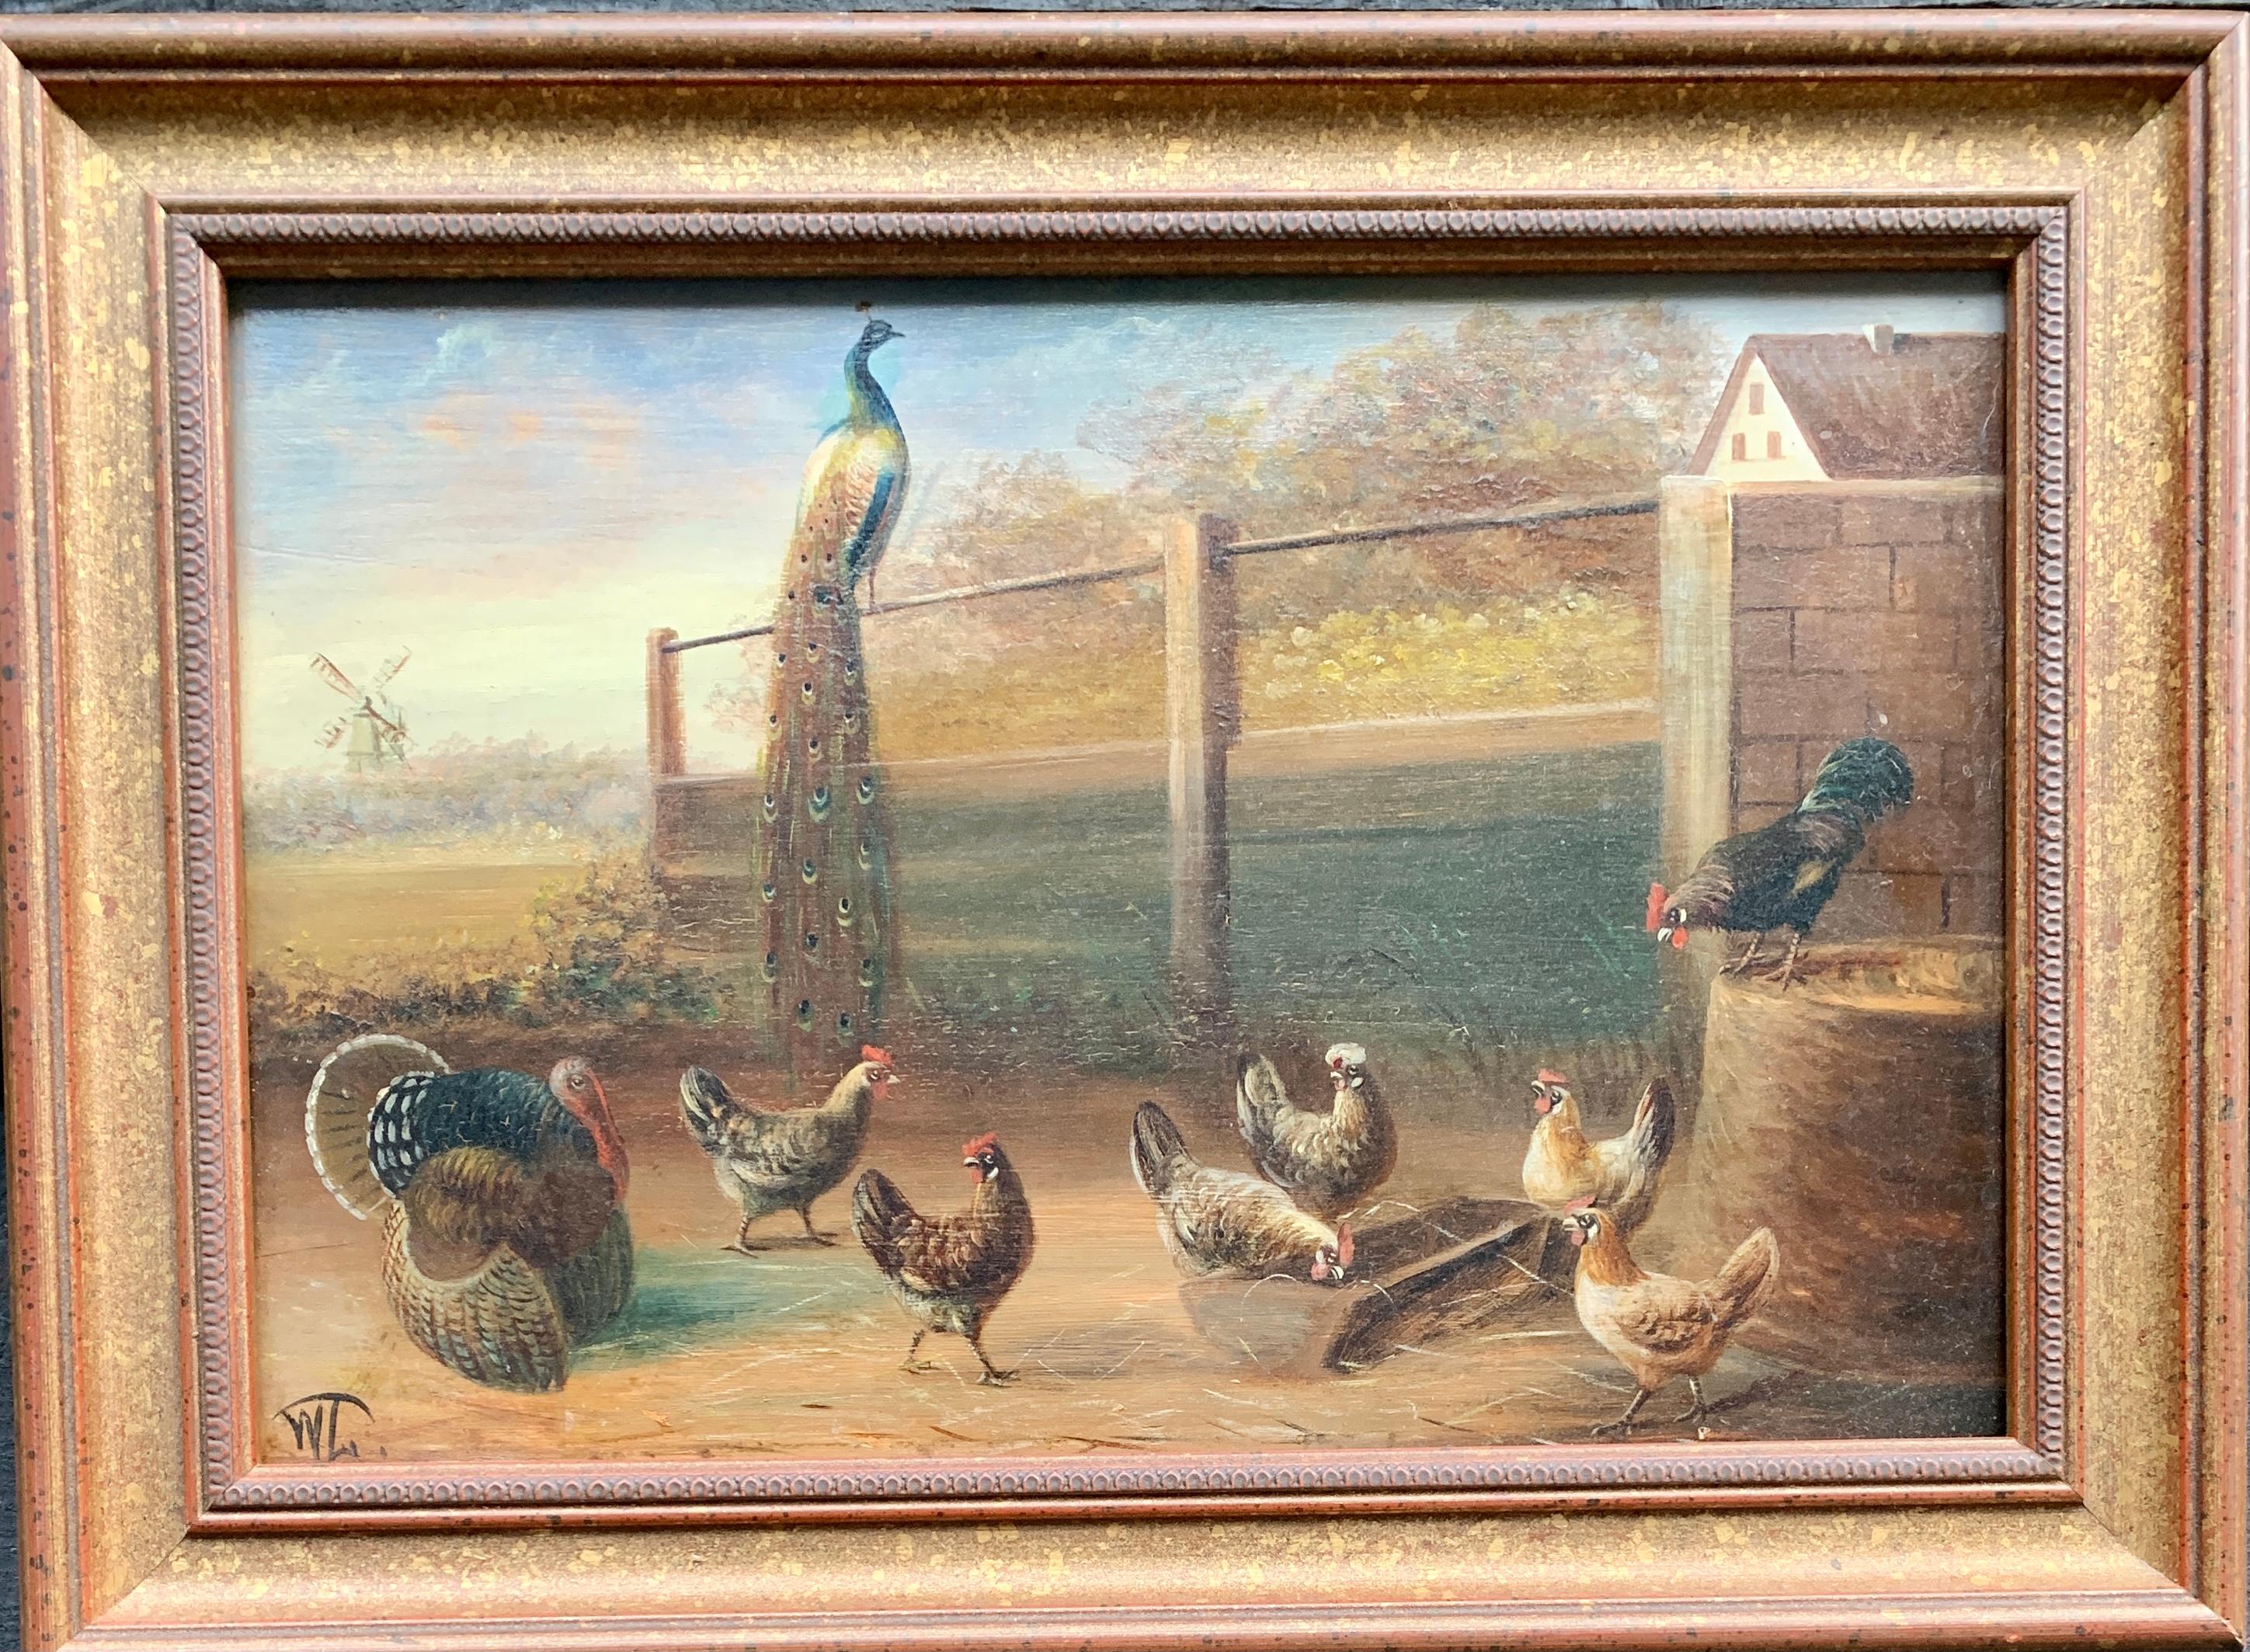 Unknown Animal Painting - 19th century Dutch or Flemish bird study in a landscape, with chickens, turkey 